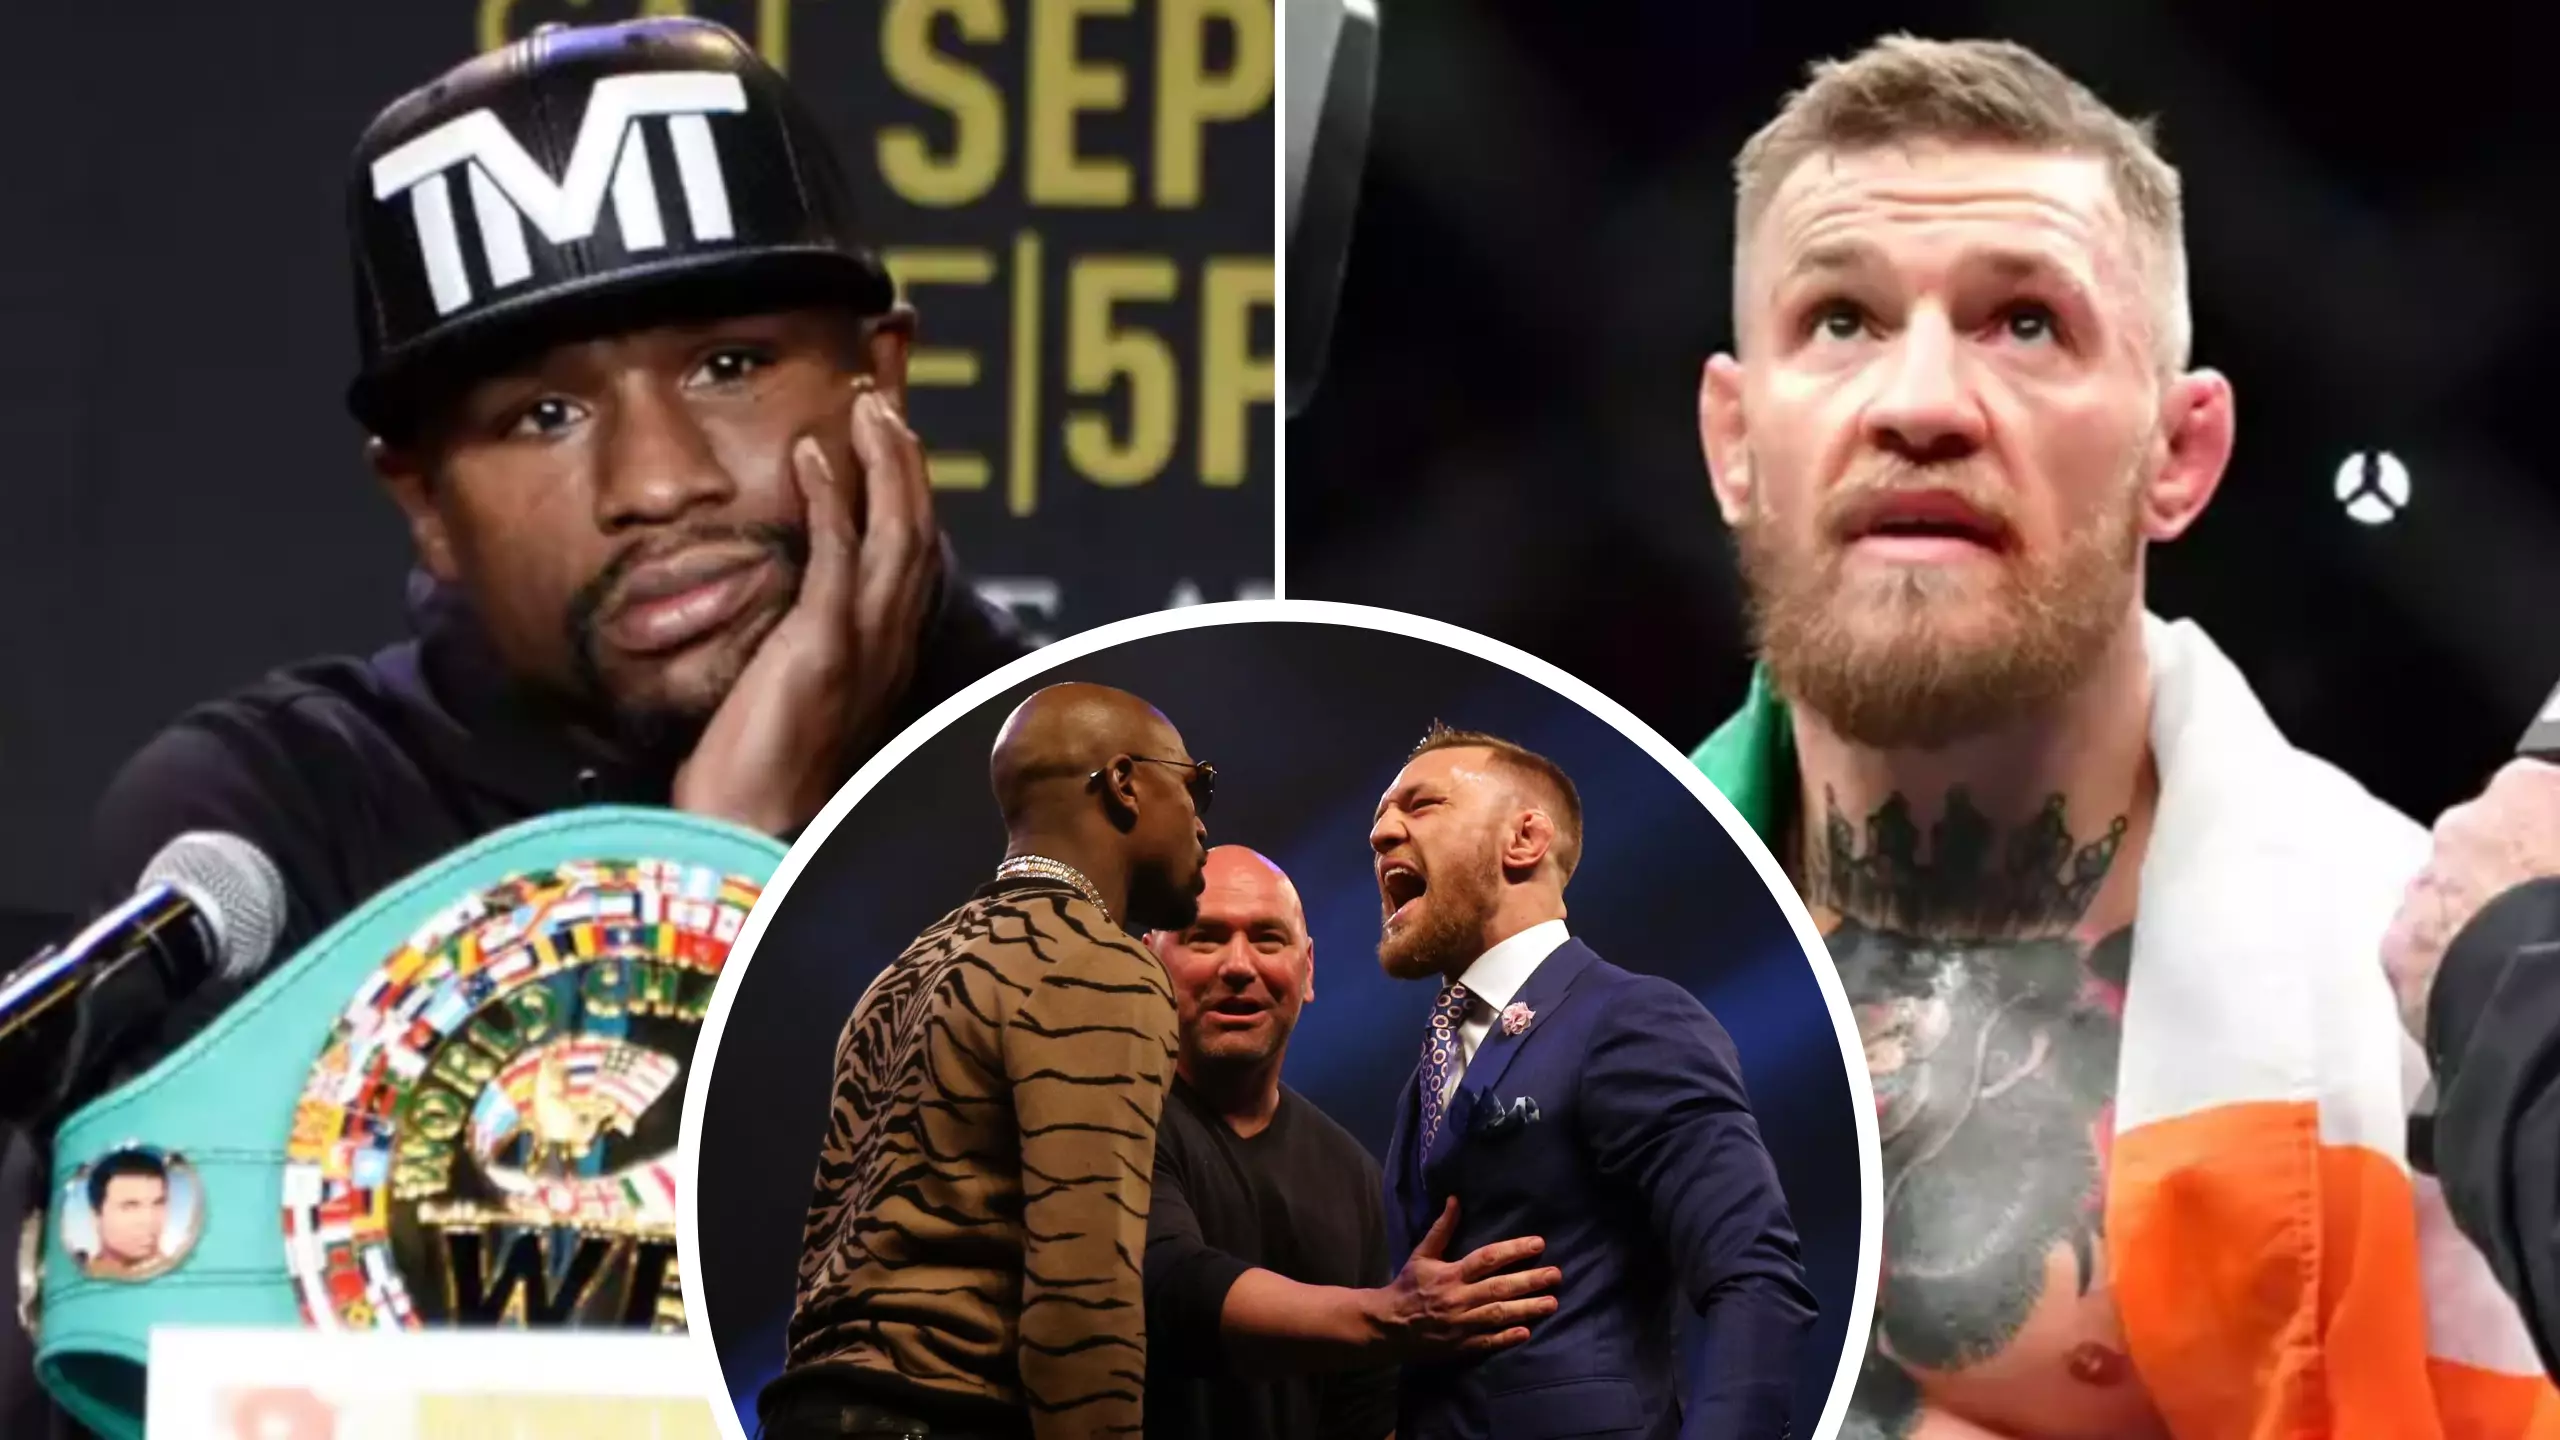 Floyd Mayweather Drops Biggest Hint Yet That He Is Training For Conor McGregor Rematch